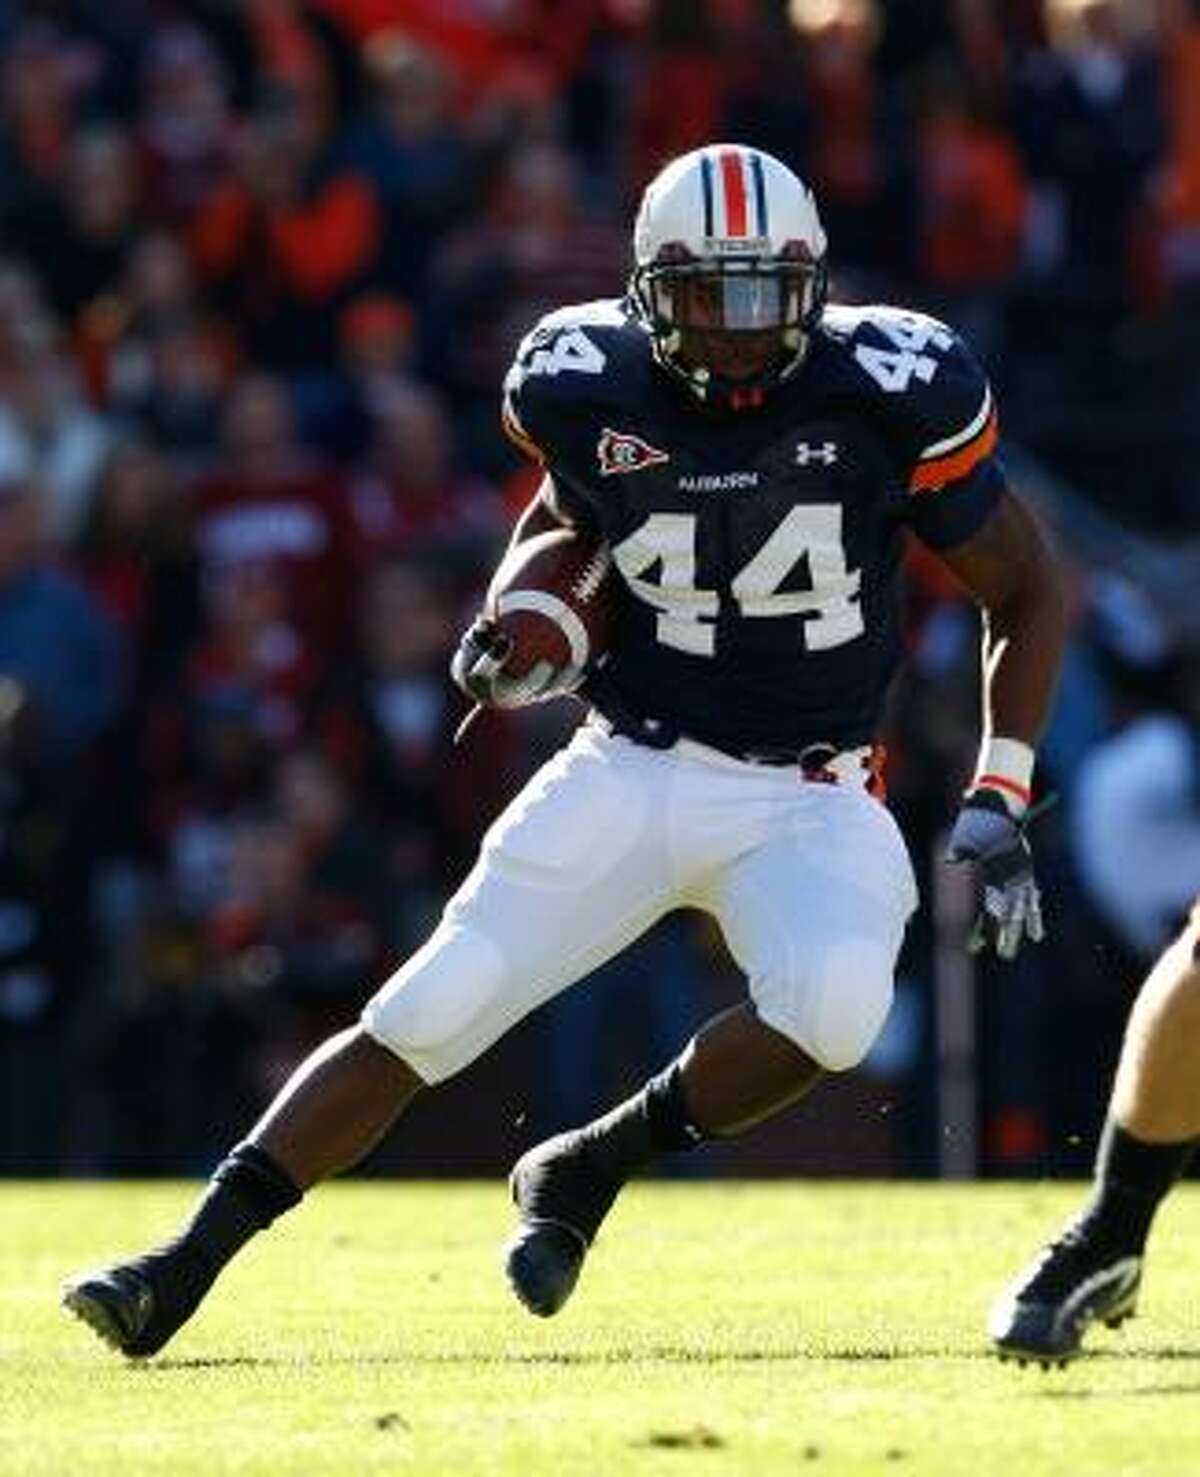 Draft evaluators expect running back Ben Tate to provide solid production out of the Texans' backfield.